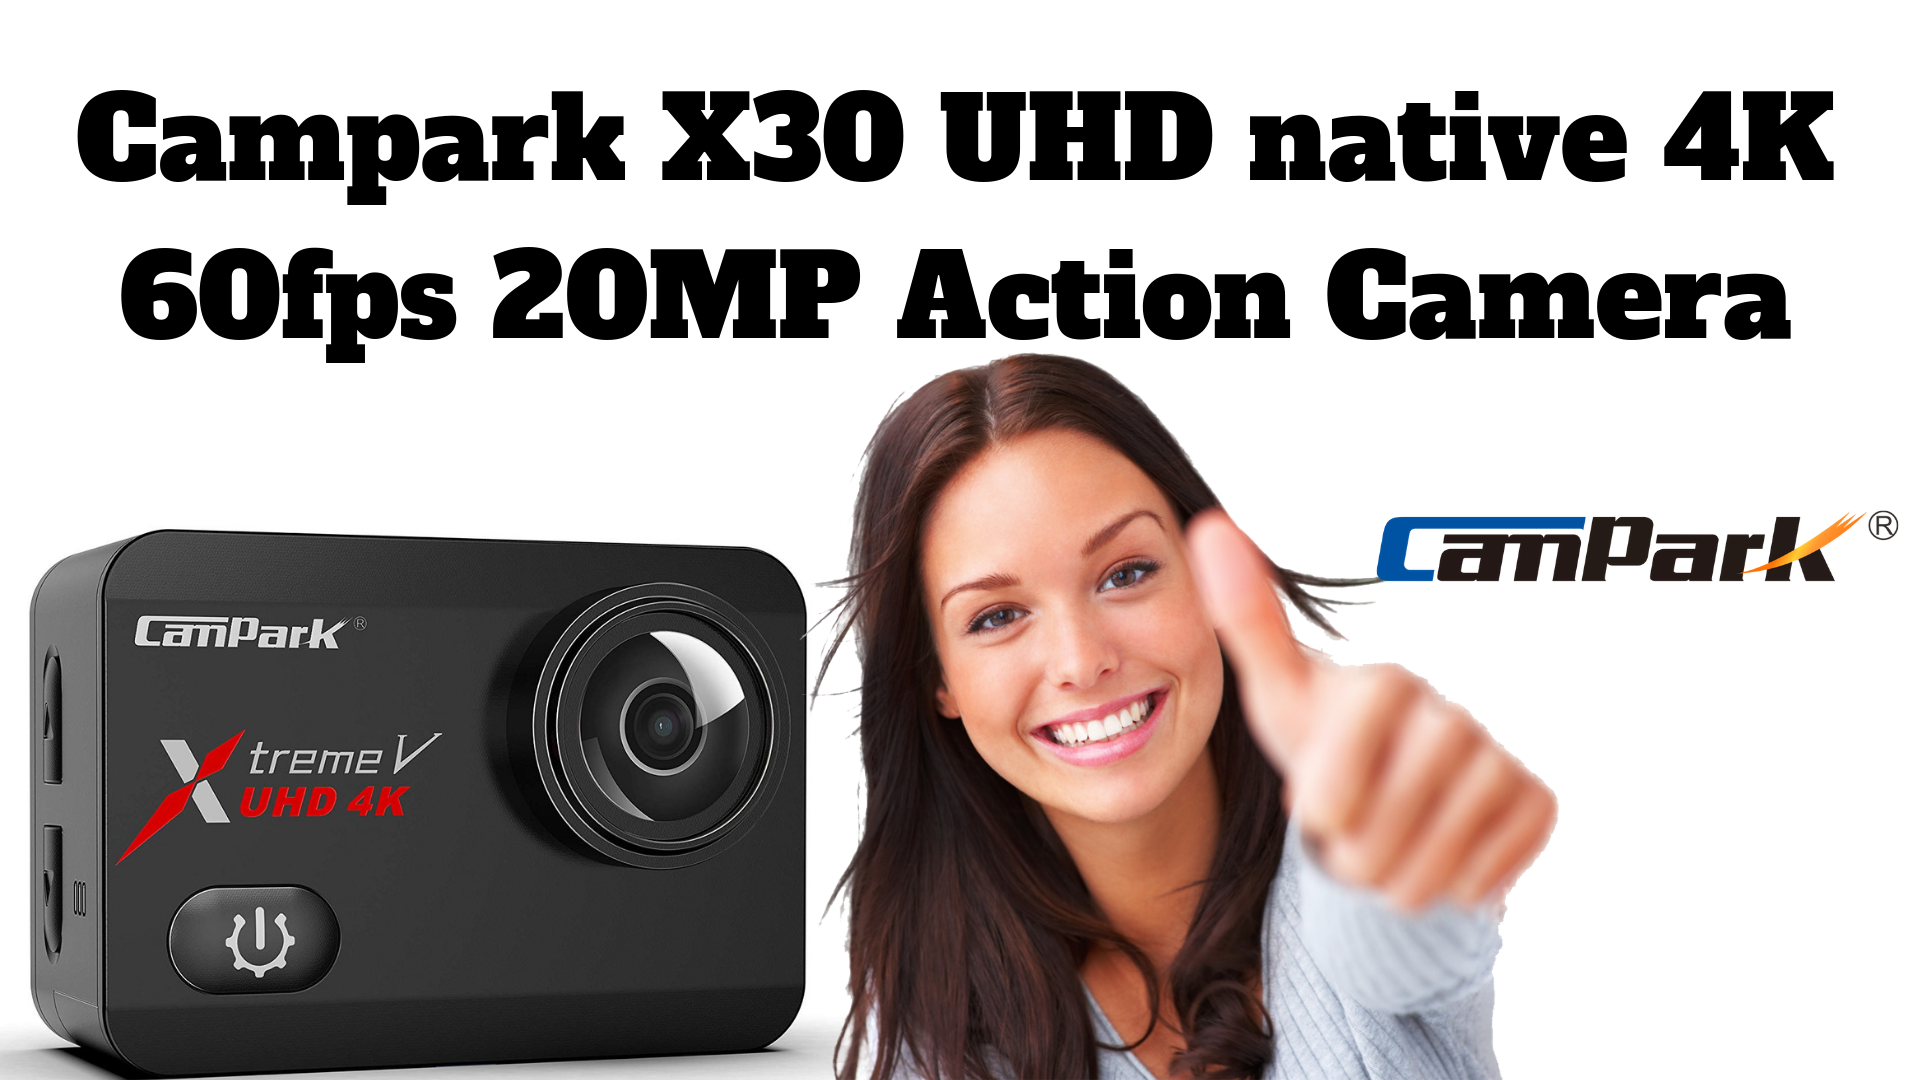 Campark X30 UHD native 4K 60fps 20MP Action Camera - Malware Removal, PC Repair and How-to Videos